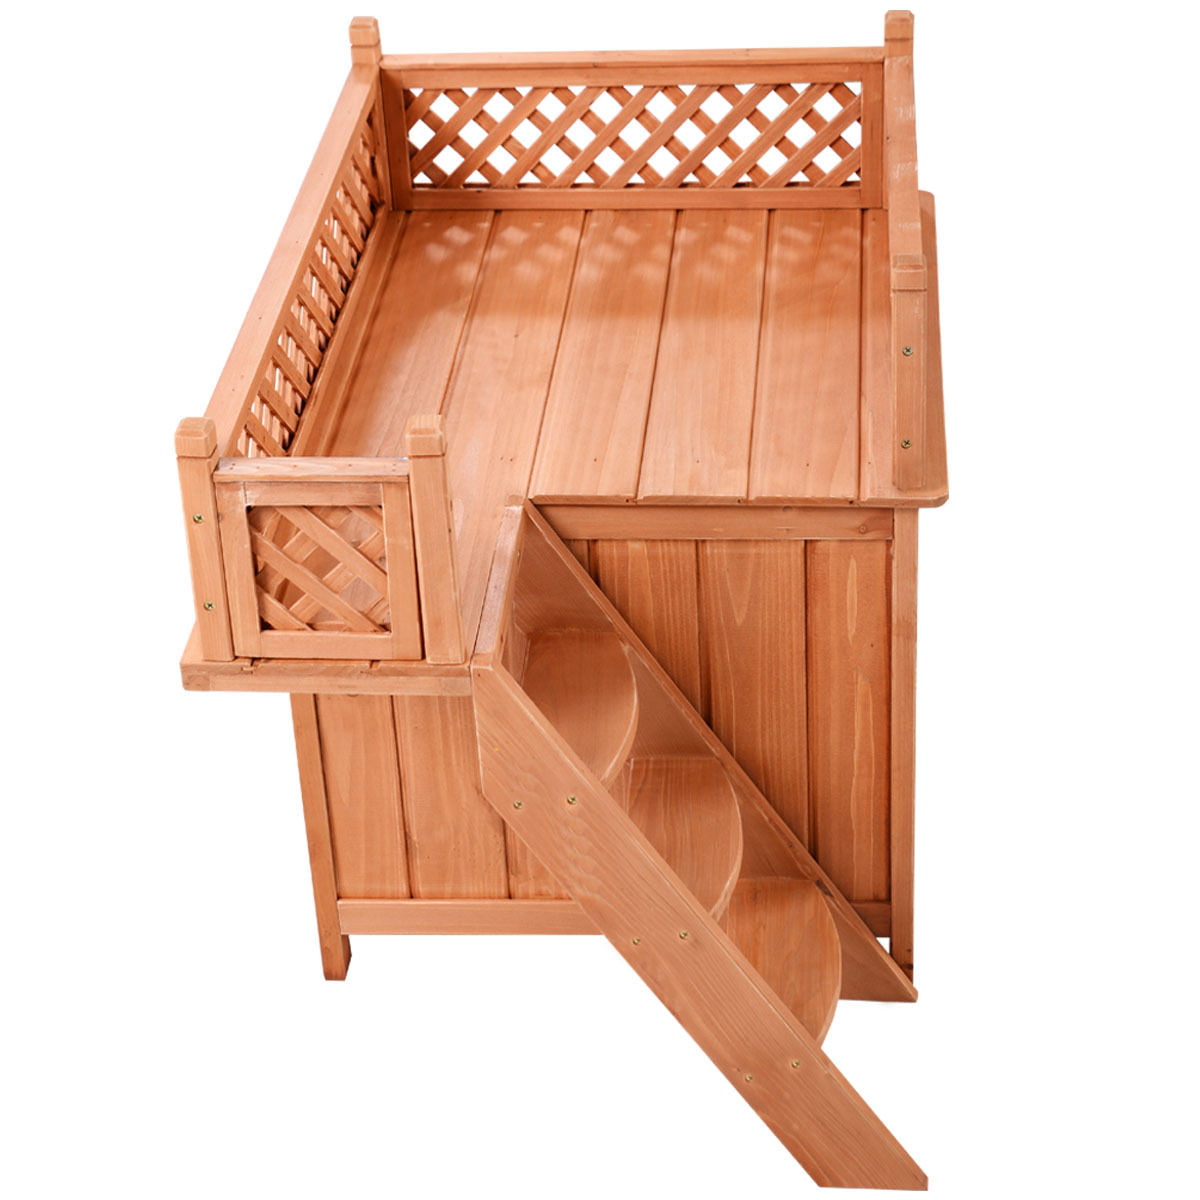 Free ebook Oak Medium Dog House with Porch Pet Puppy Wooden Outdoor Slanted Roof Elevated Raised Floor Cream 